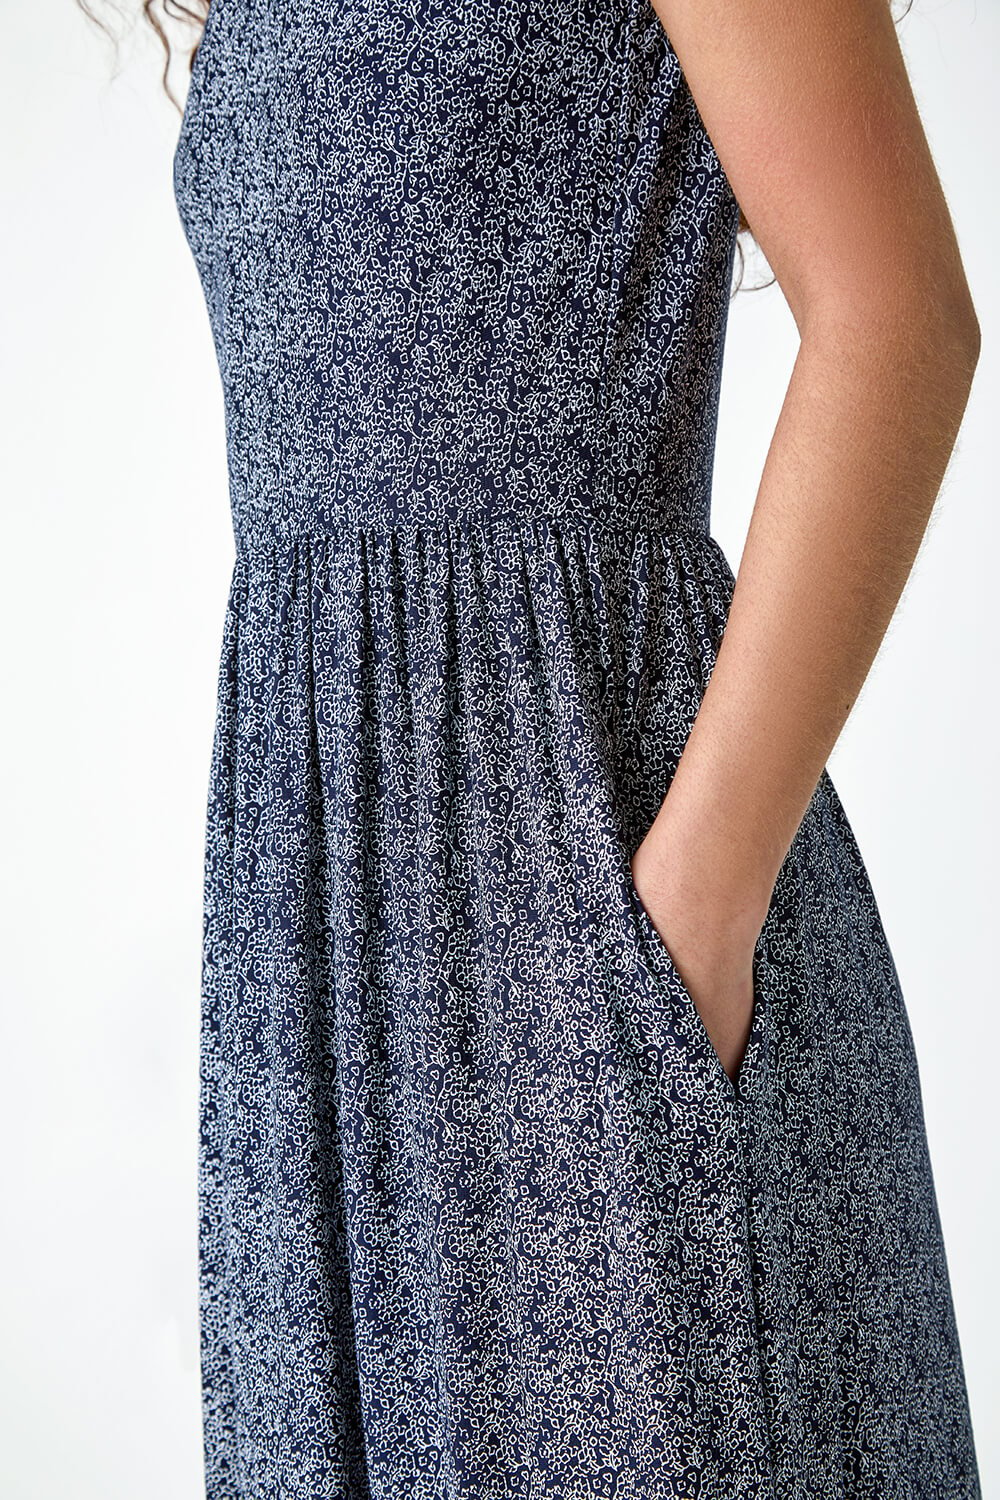 Navy  Paisley Relaxed Stretch Maxi Dress, Image 5 of 5